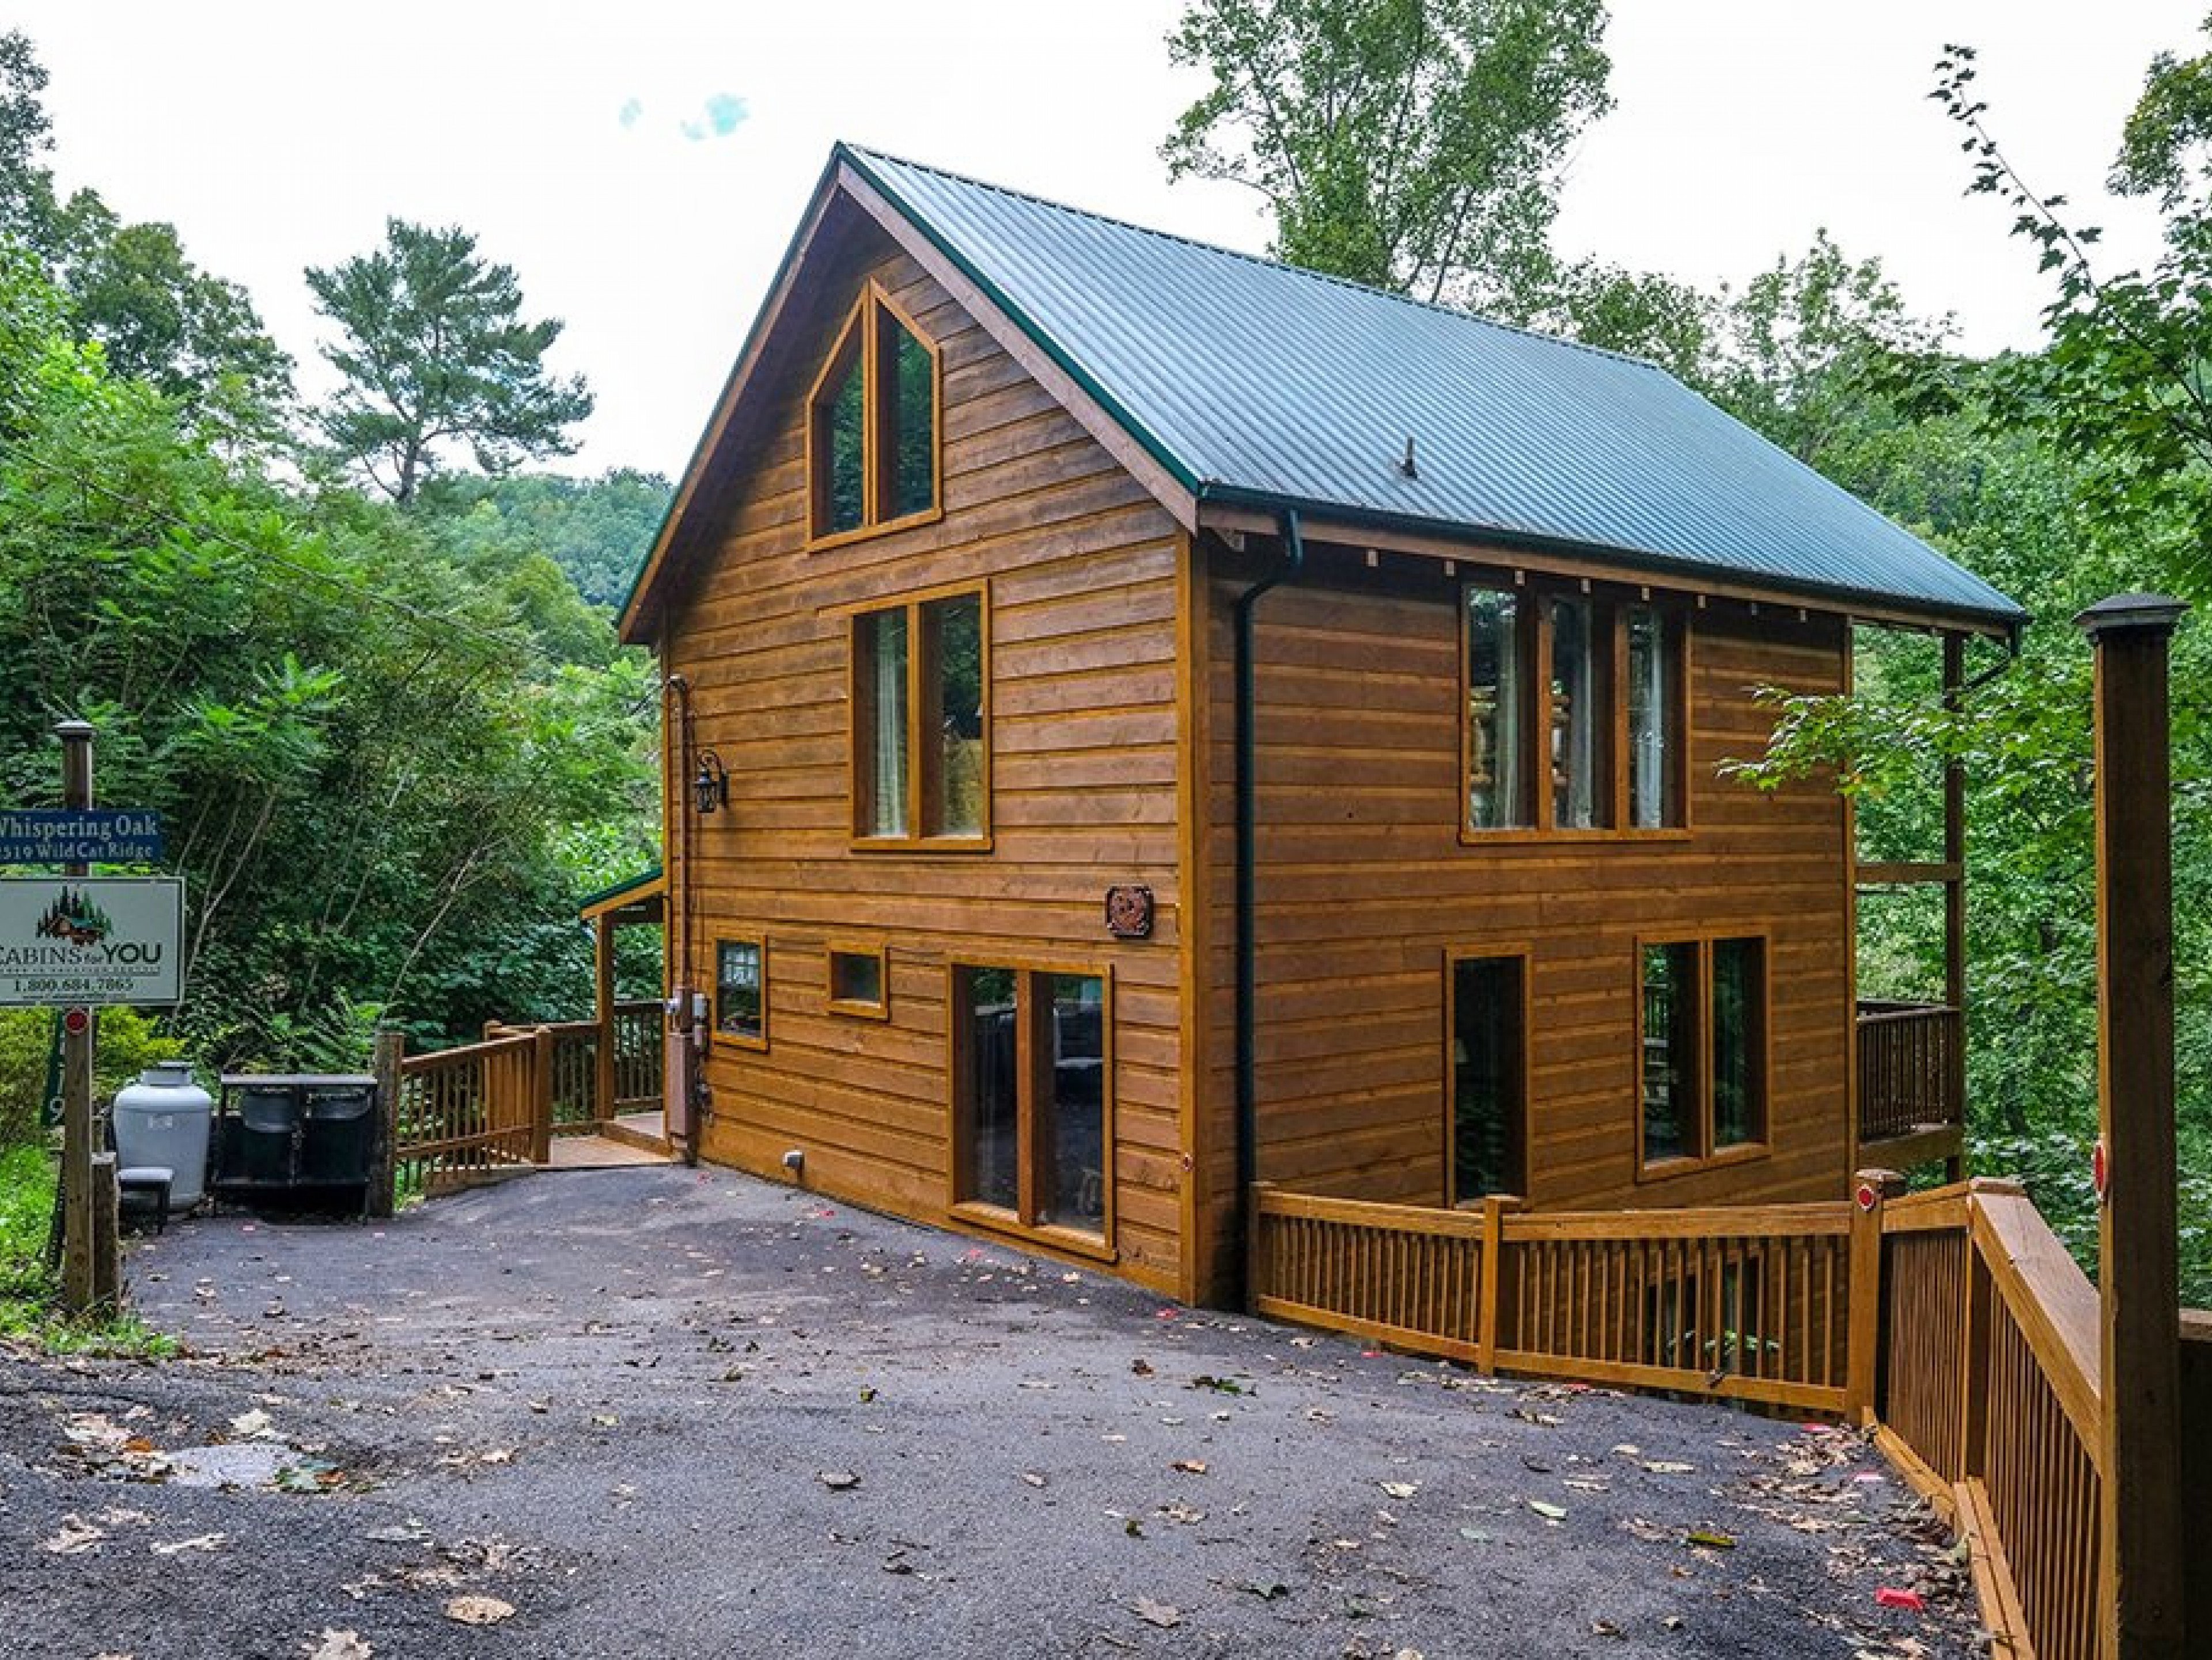 Pigeon Forge 21 family cabin rentals